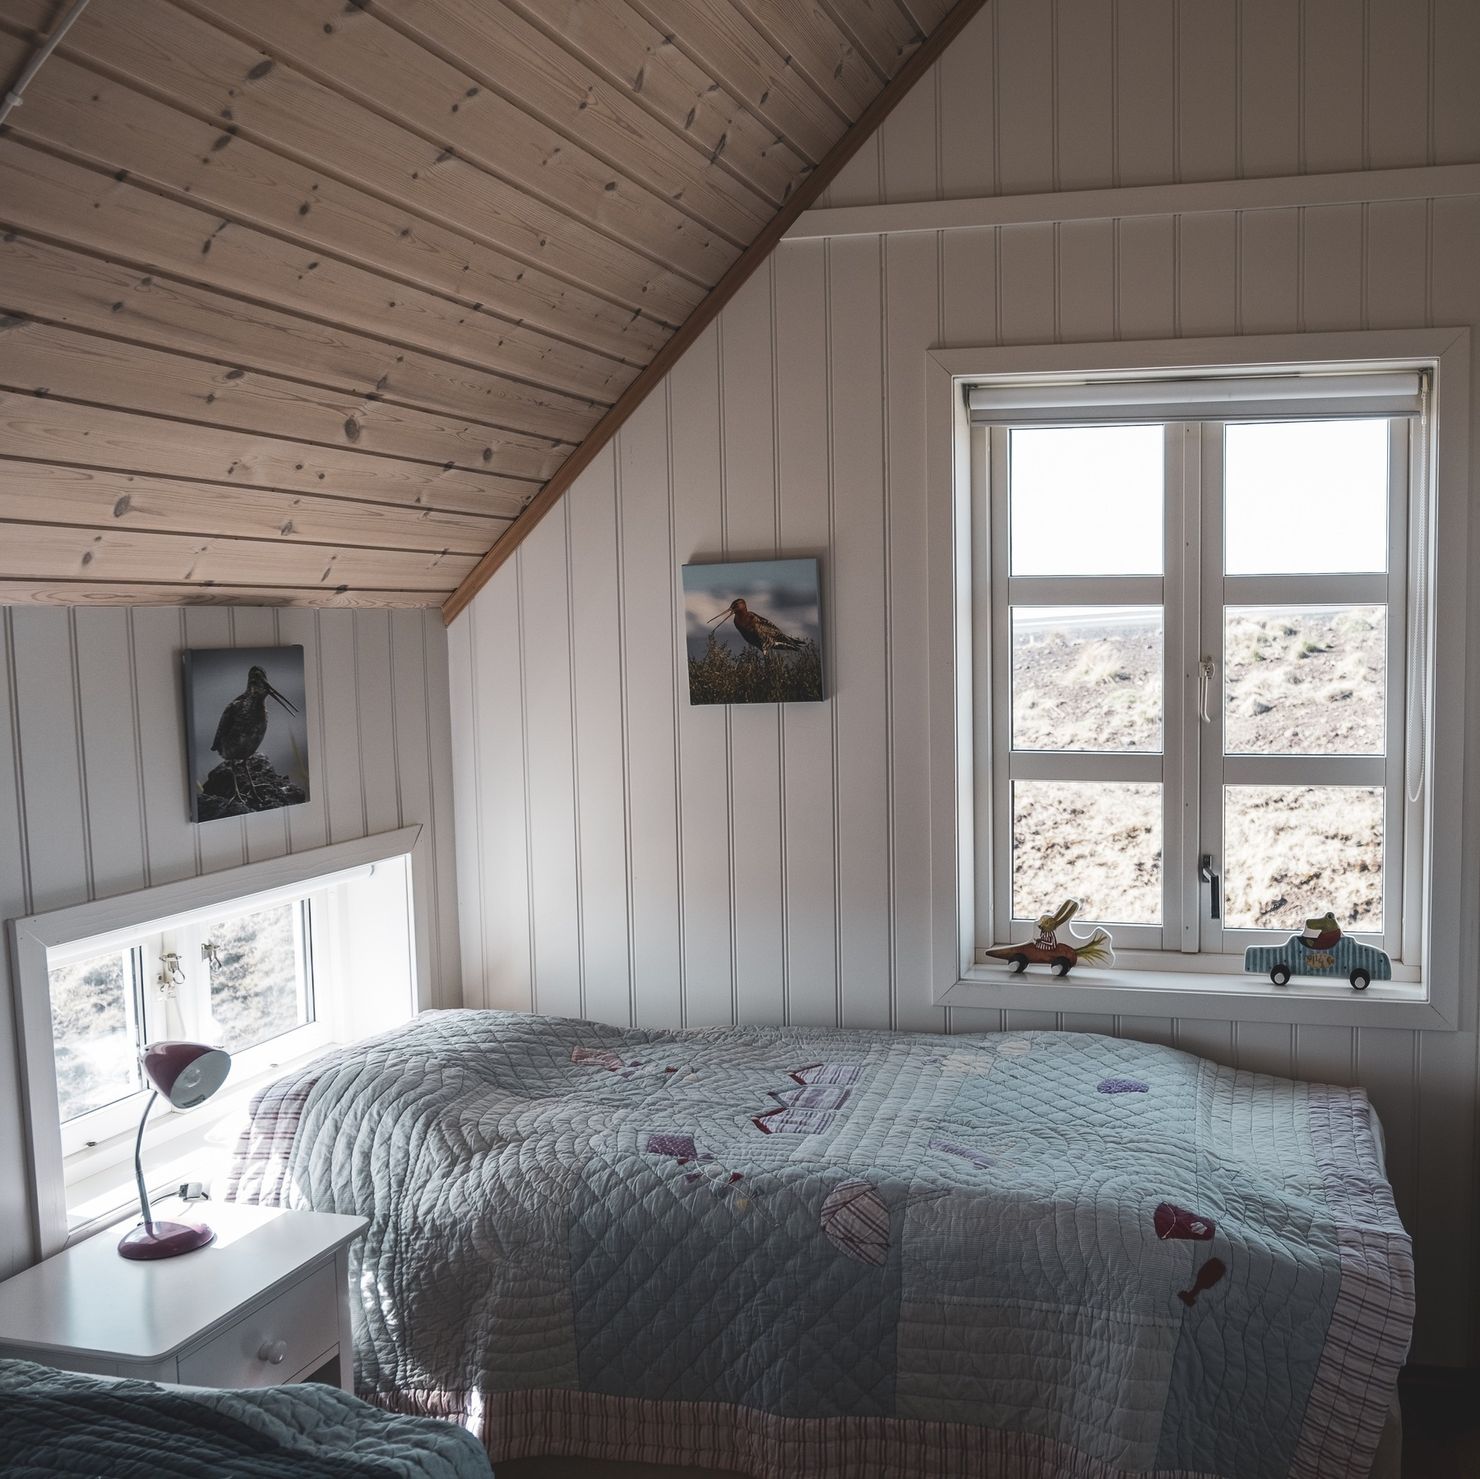 One bedroom in the converted attic with transom window